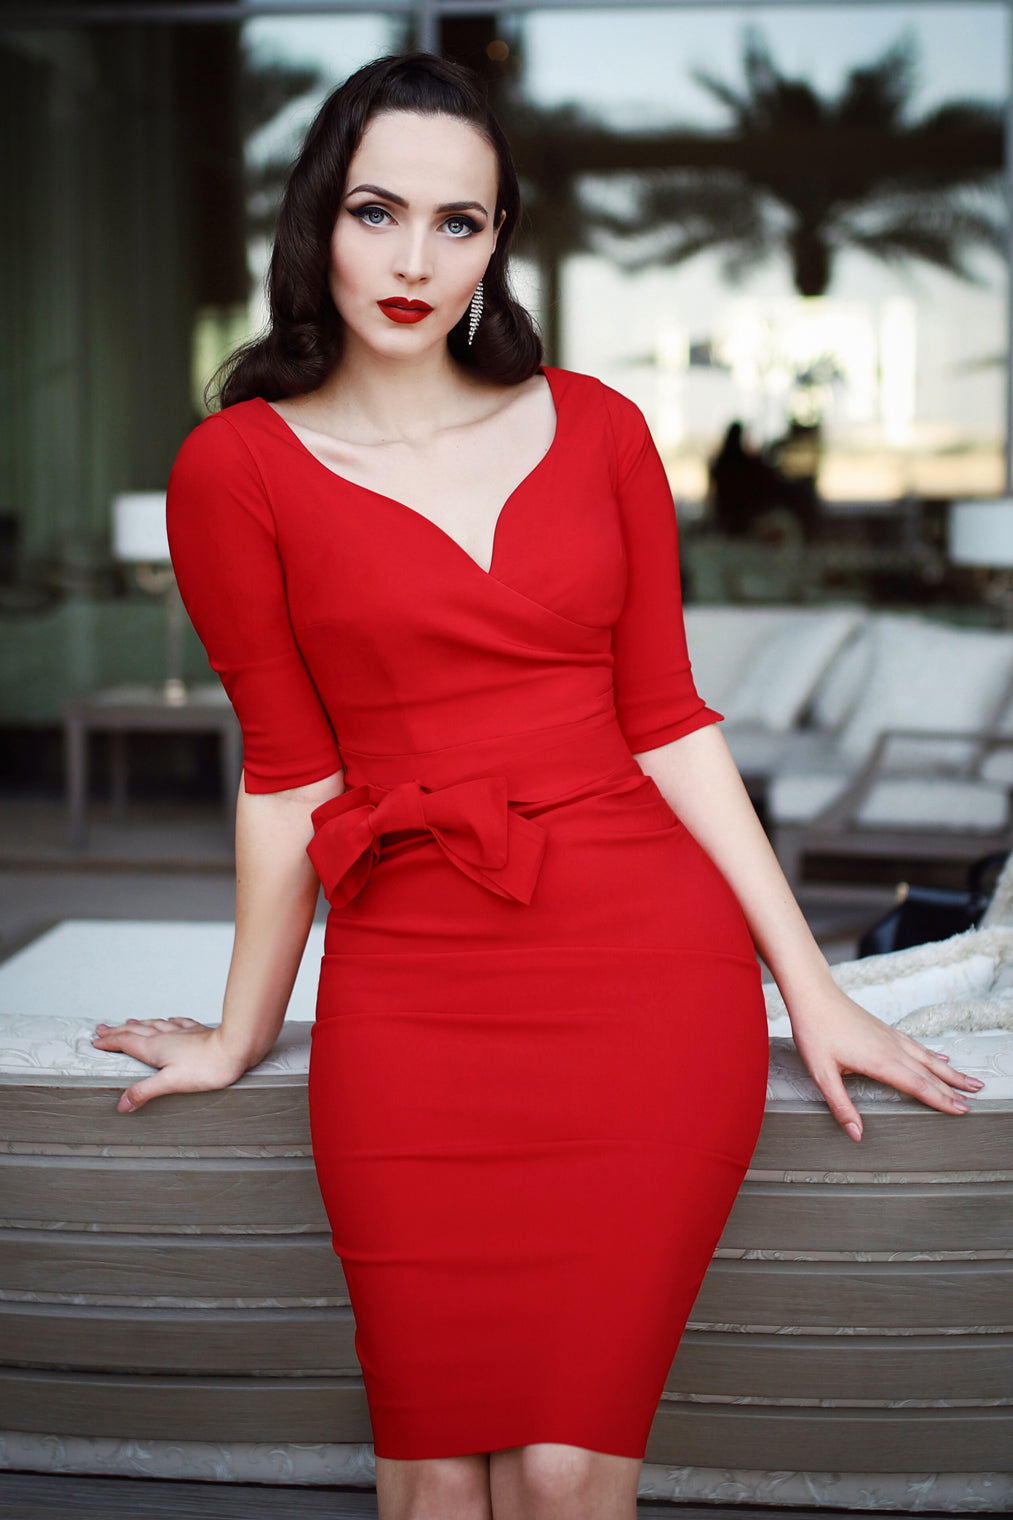 The Bombshell Sleeved Pencil Dress in Lipstick Red